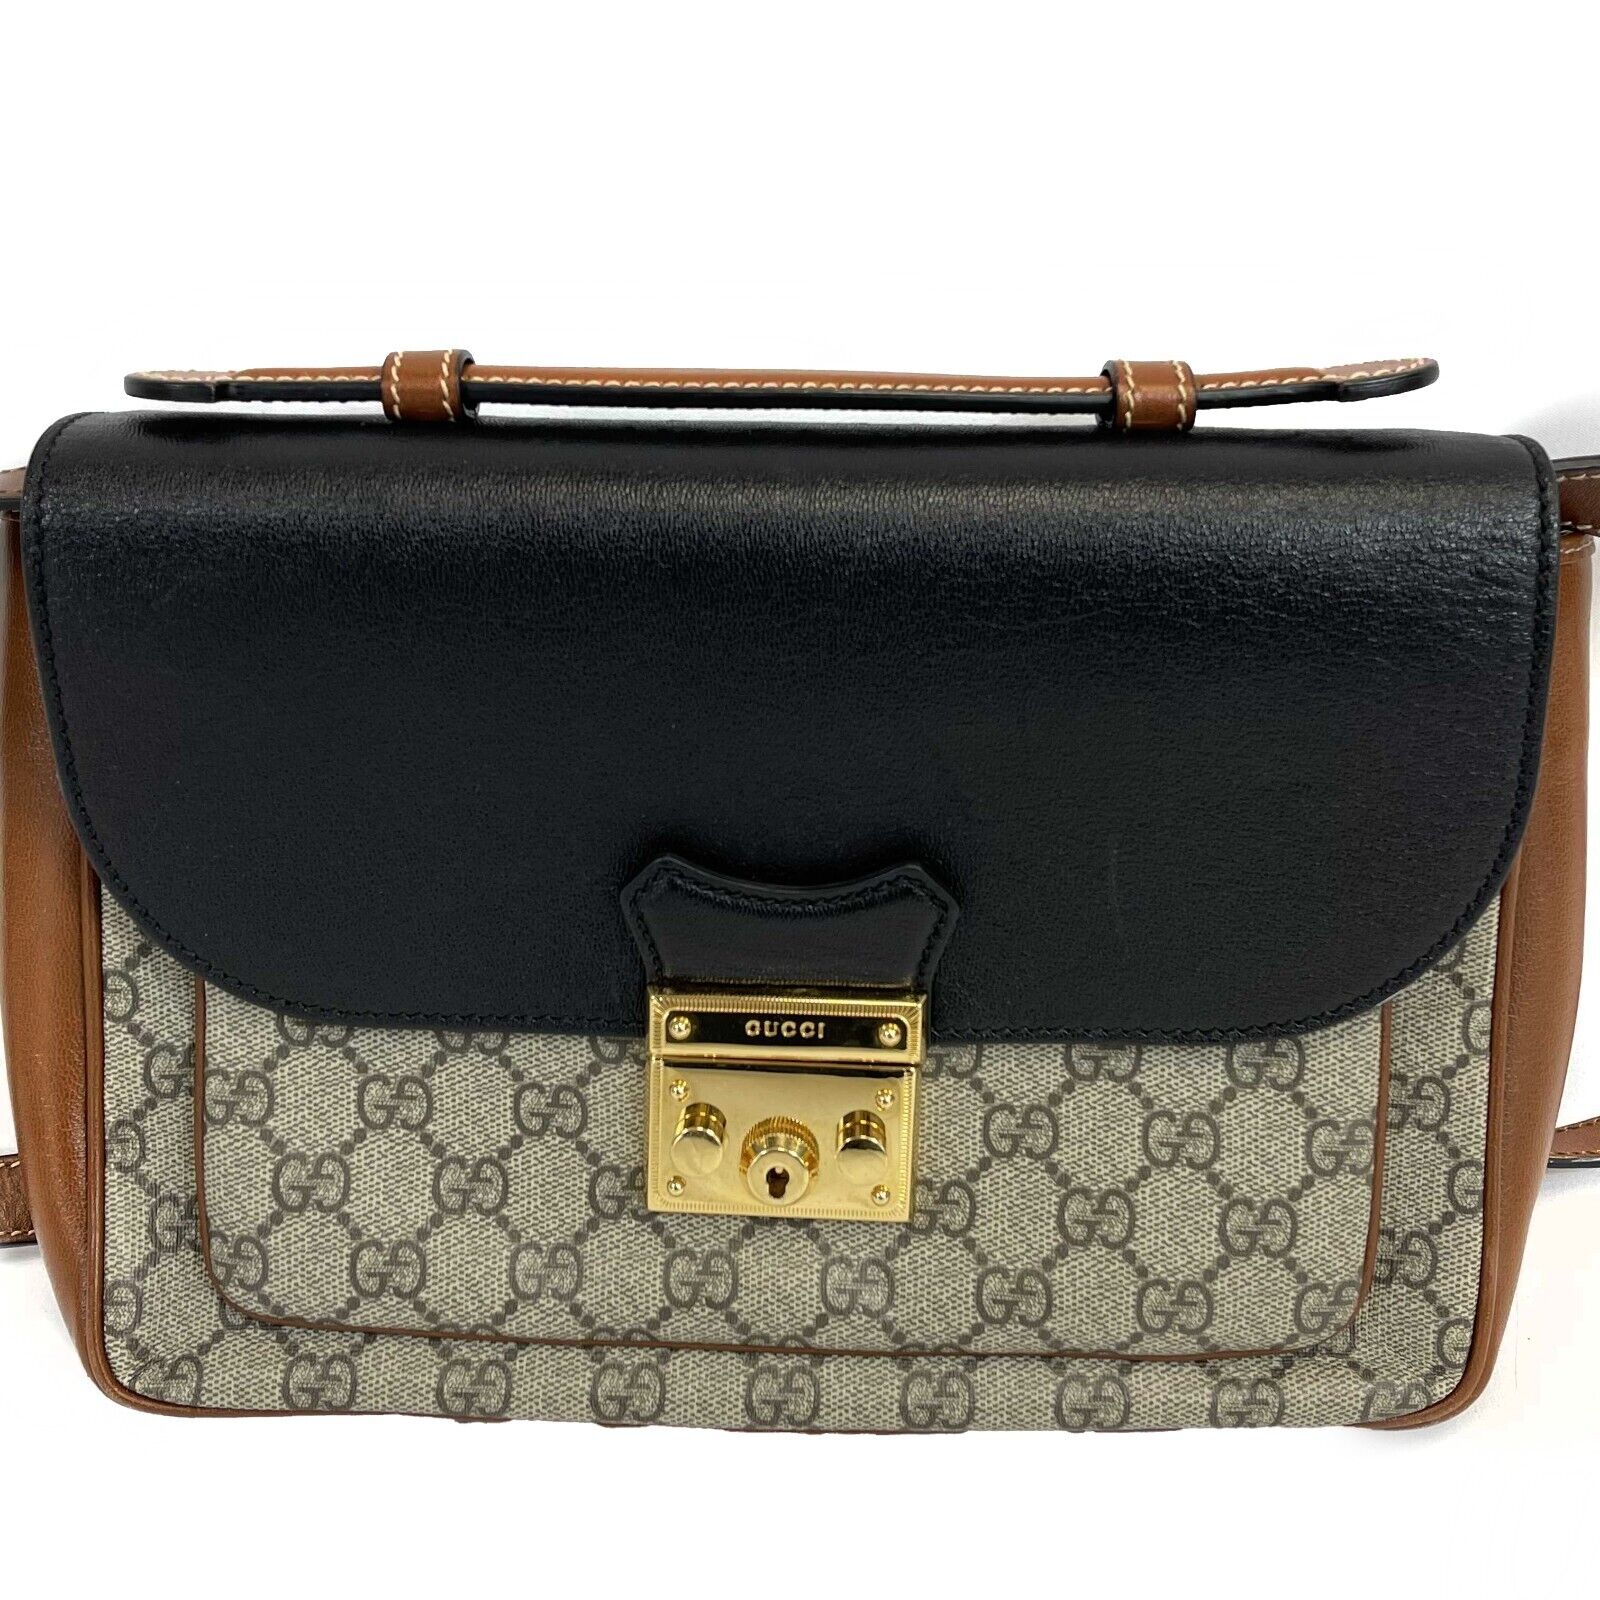 Padlock leather handbag Gucci Brown in Leather - 31964660